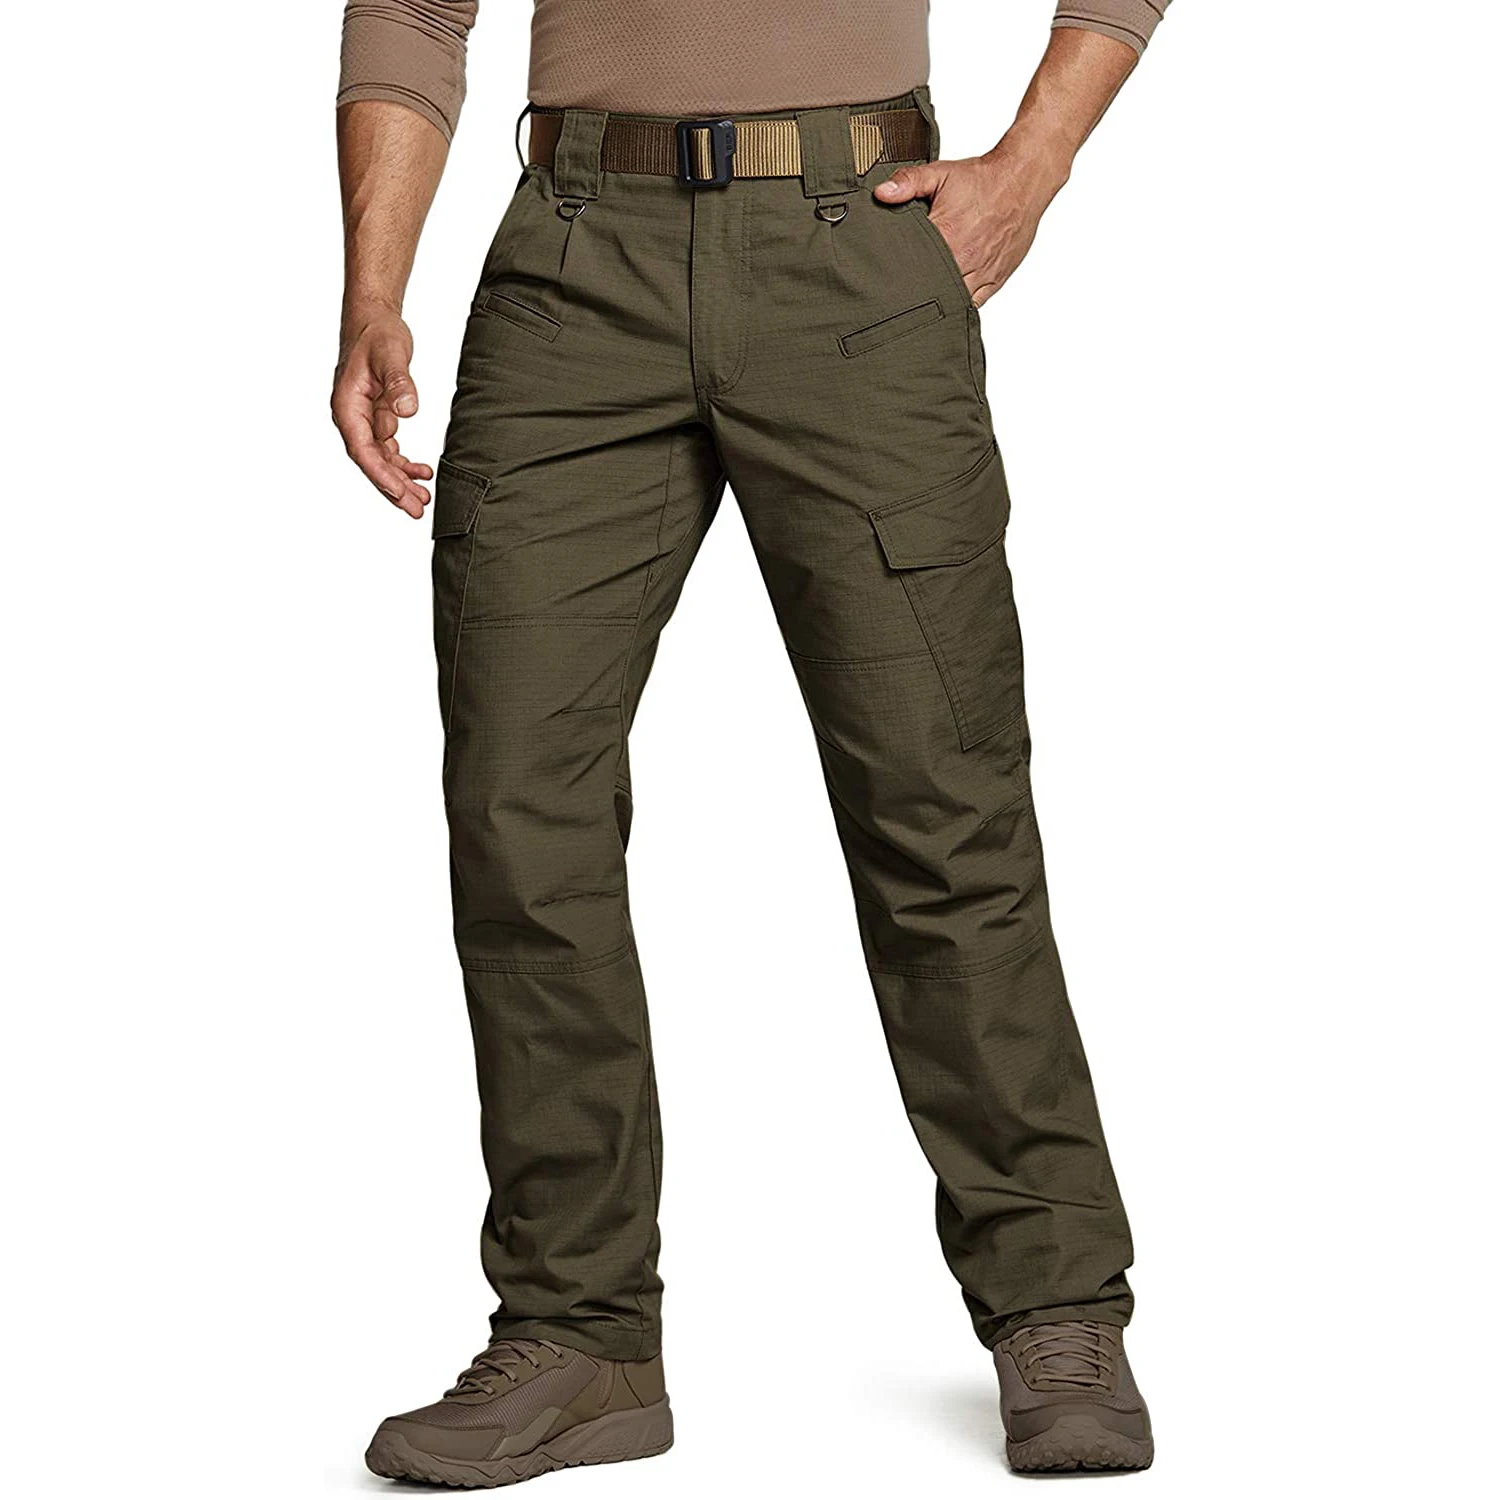 Hot Selling New Tactical Multifunction Cargo Pants Paintball Training ...